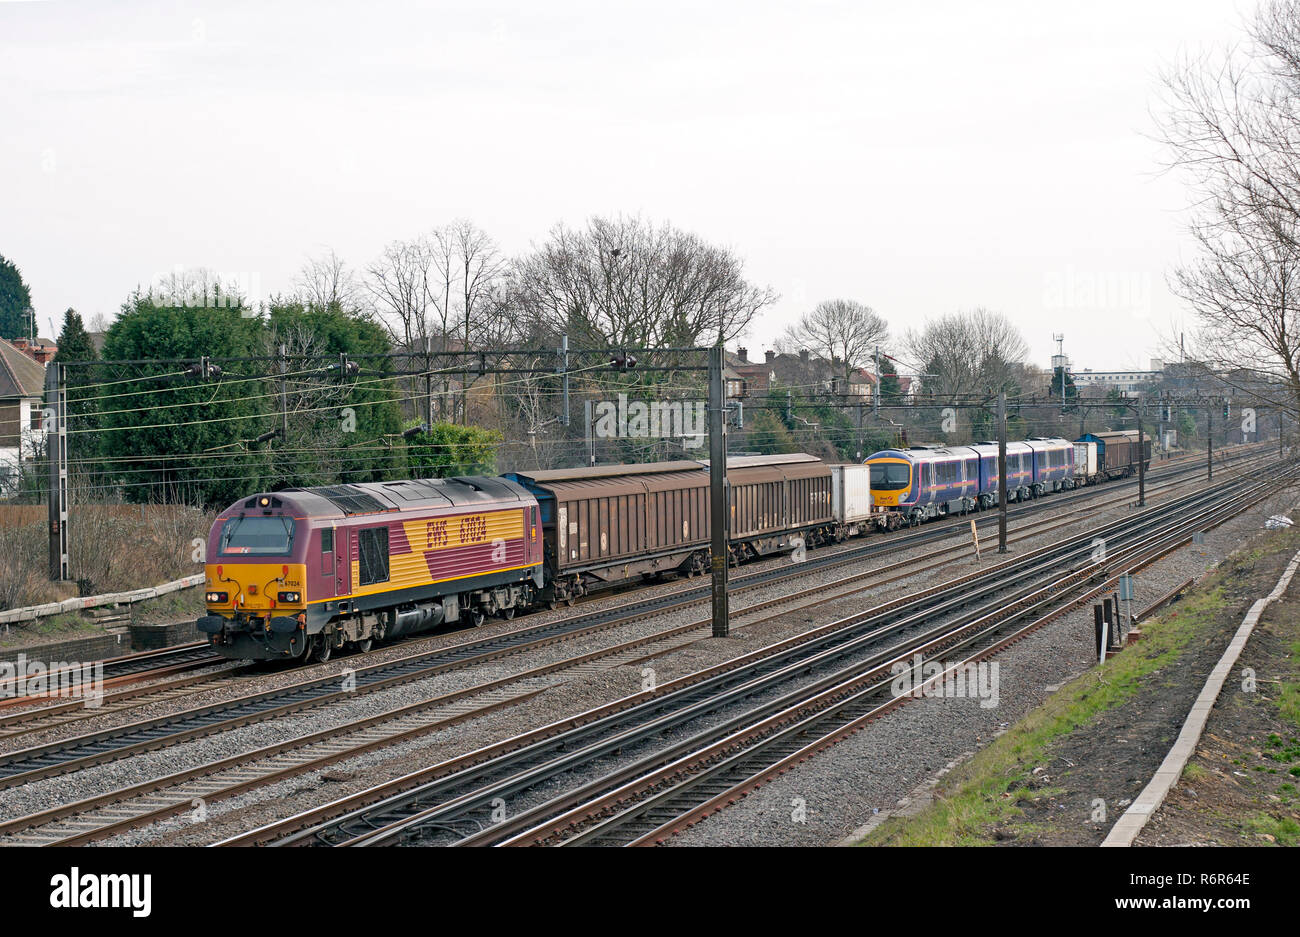 A class 67 diesel locomotive number 67024 hauling barrier wagons and a class 185 diesel multiple unit number 185110 at South Kenton. Stock Photo